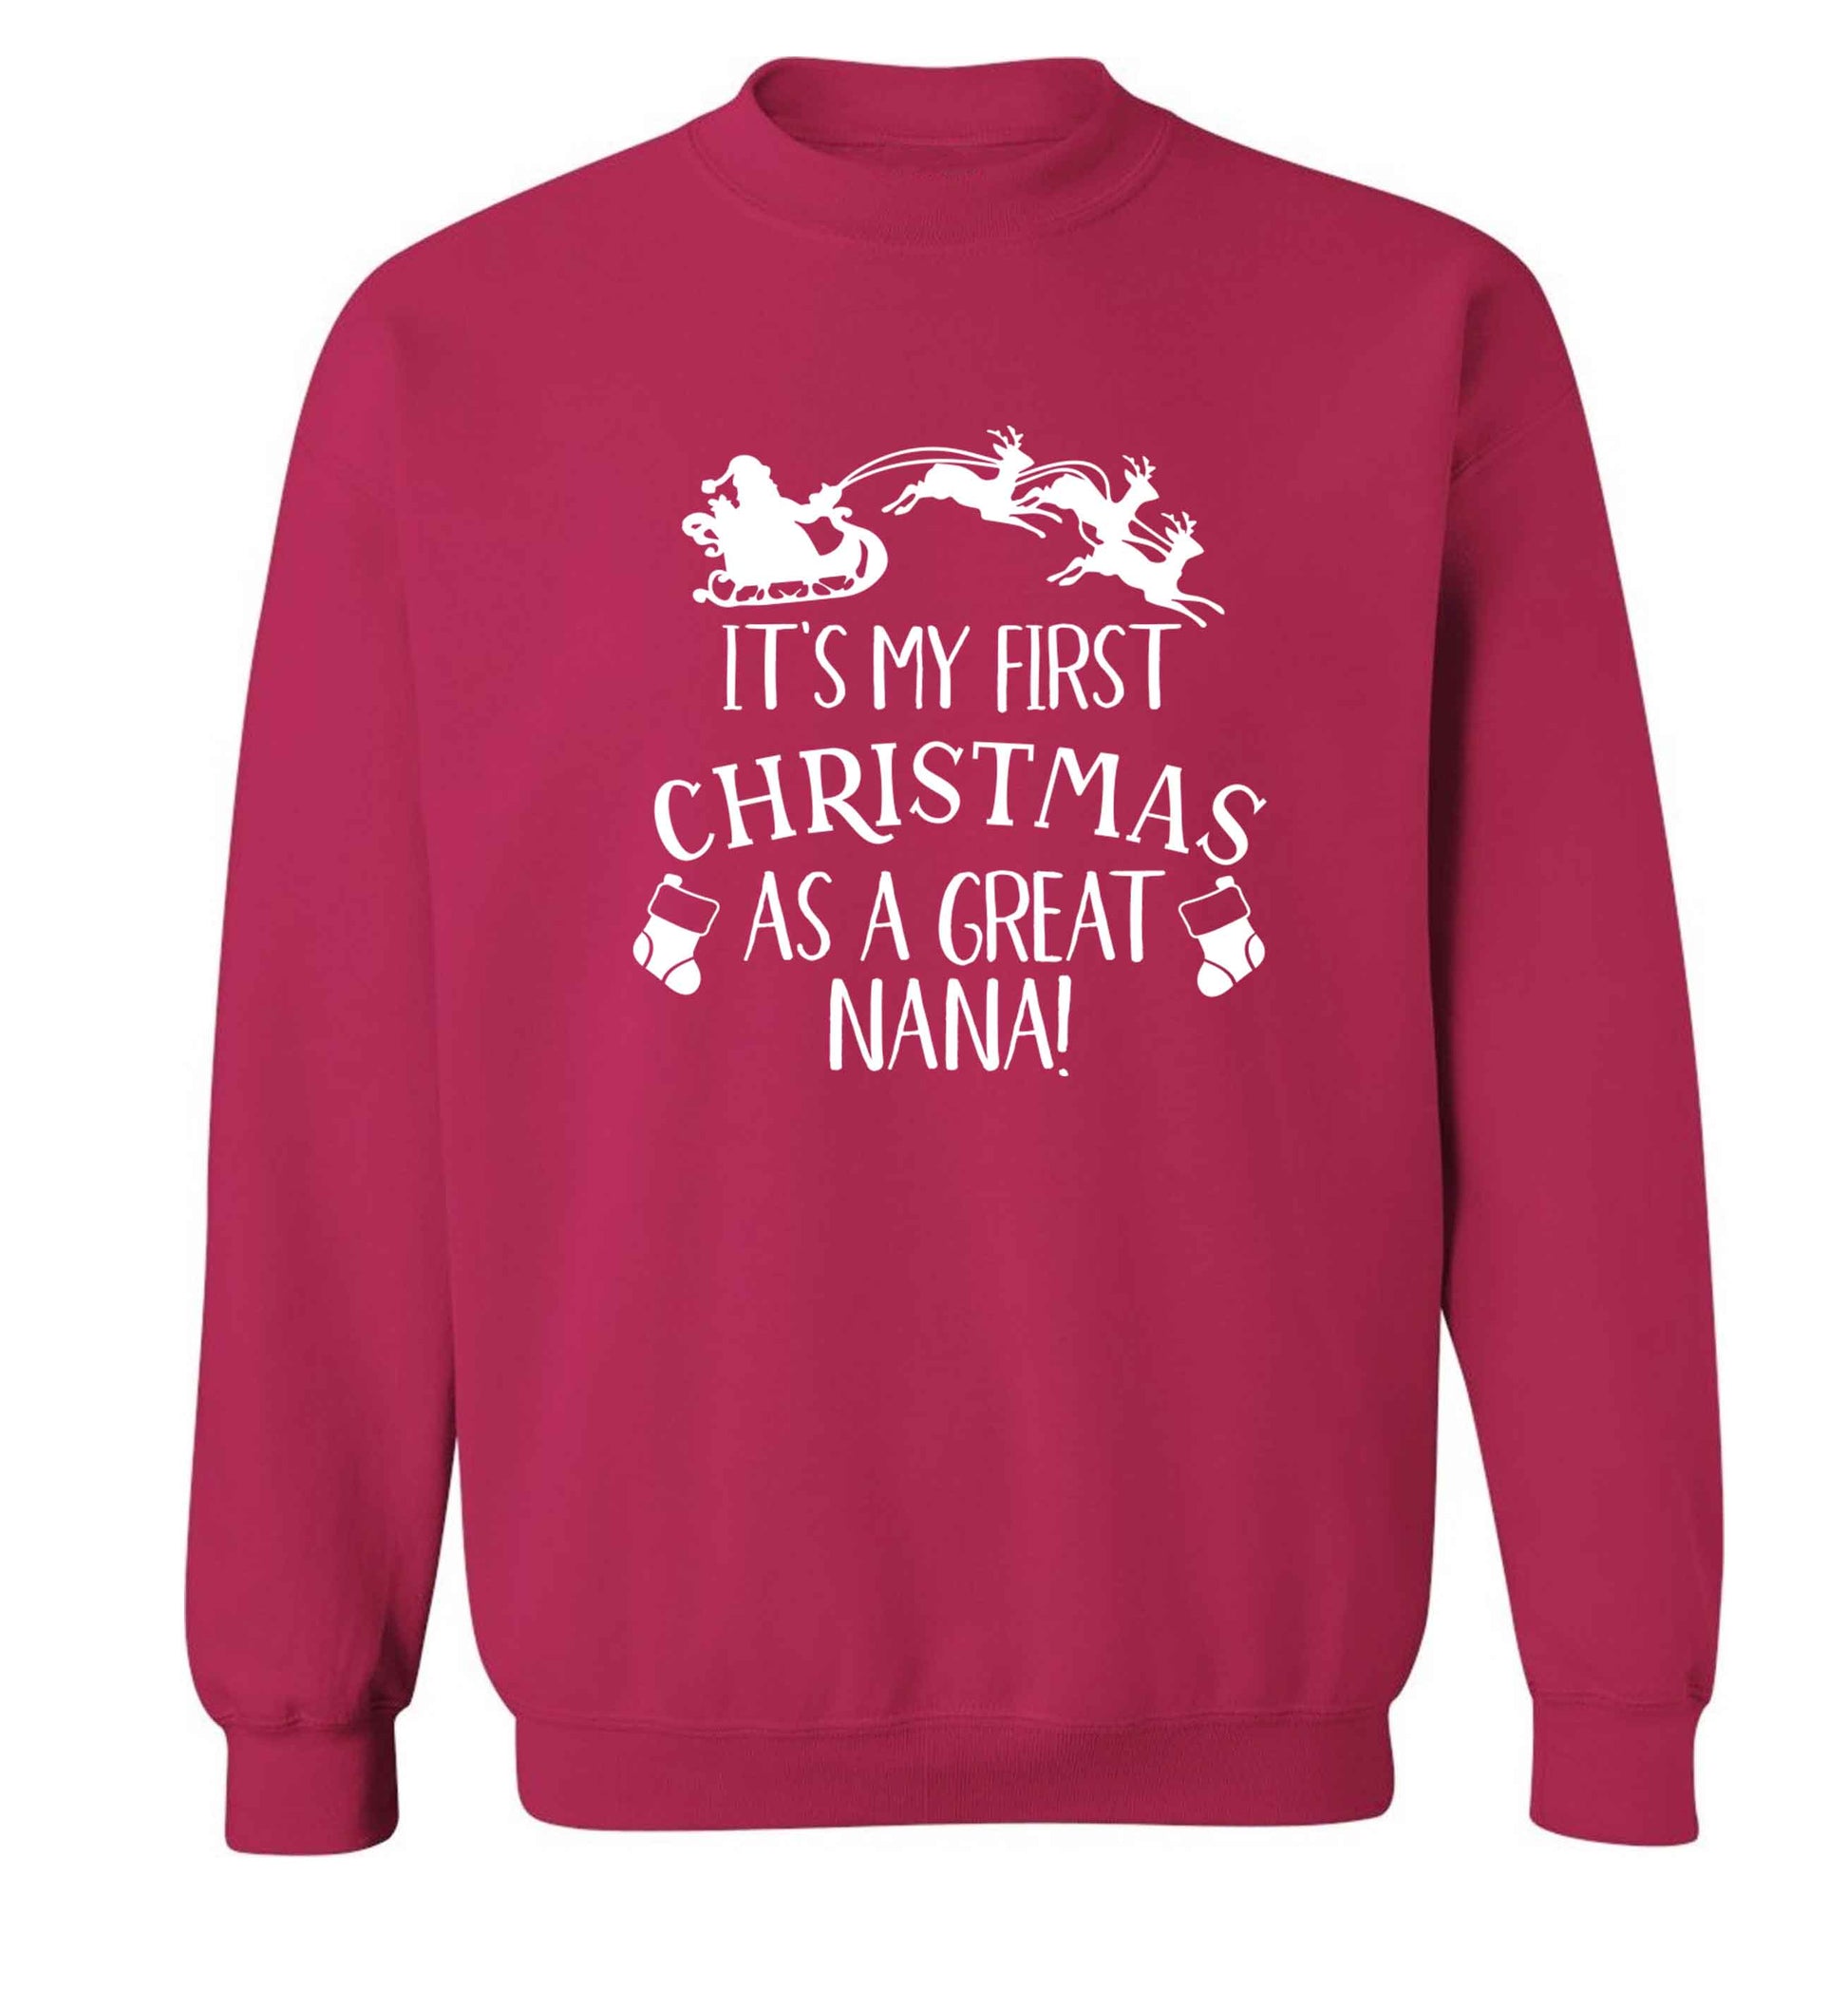 It's my first Christmas as a great nana! Adult's unisex pink Sweater 2XL